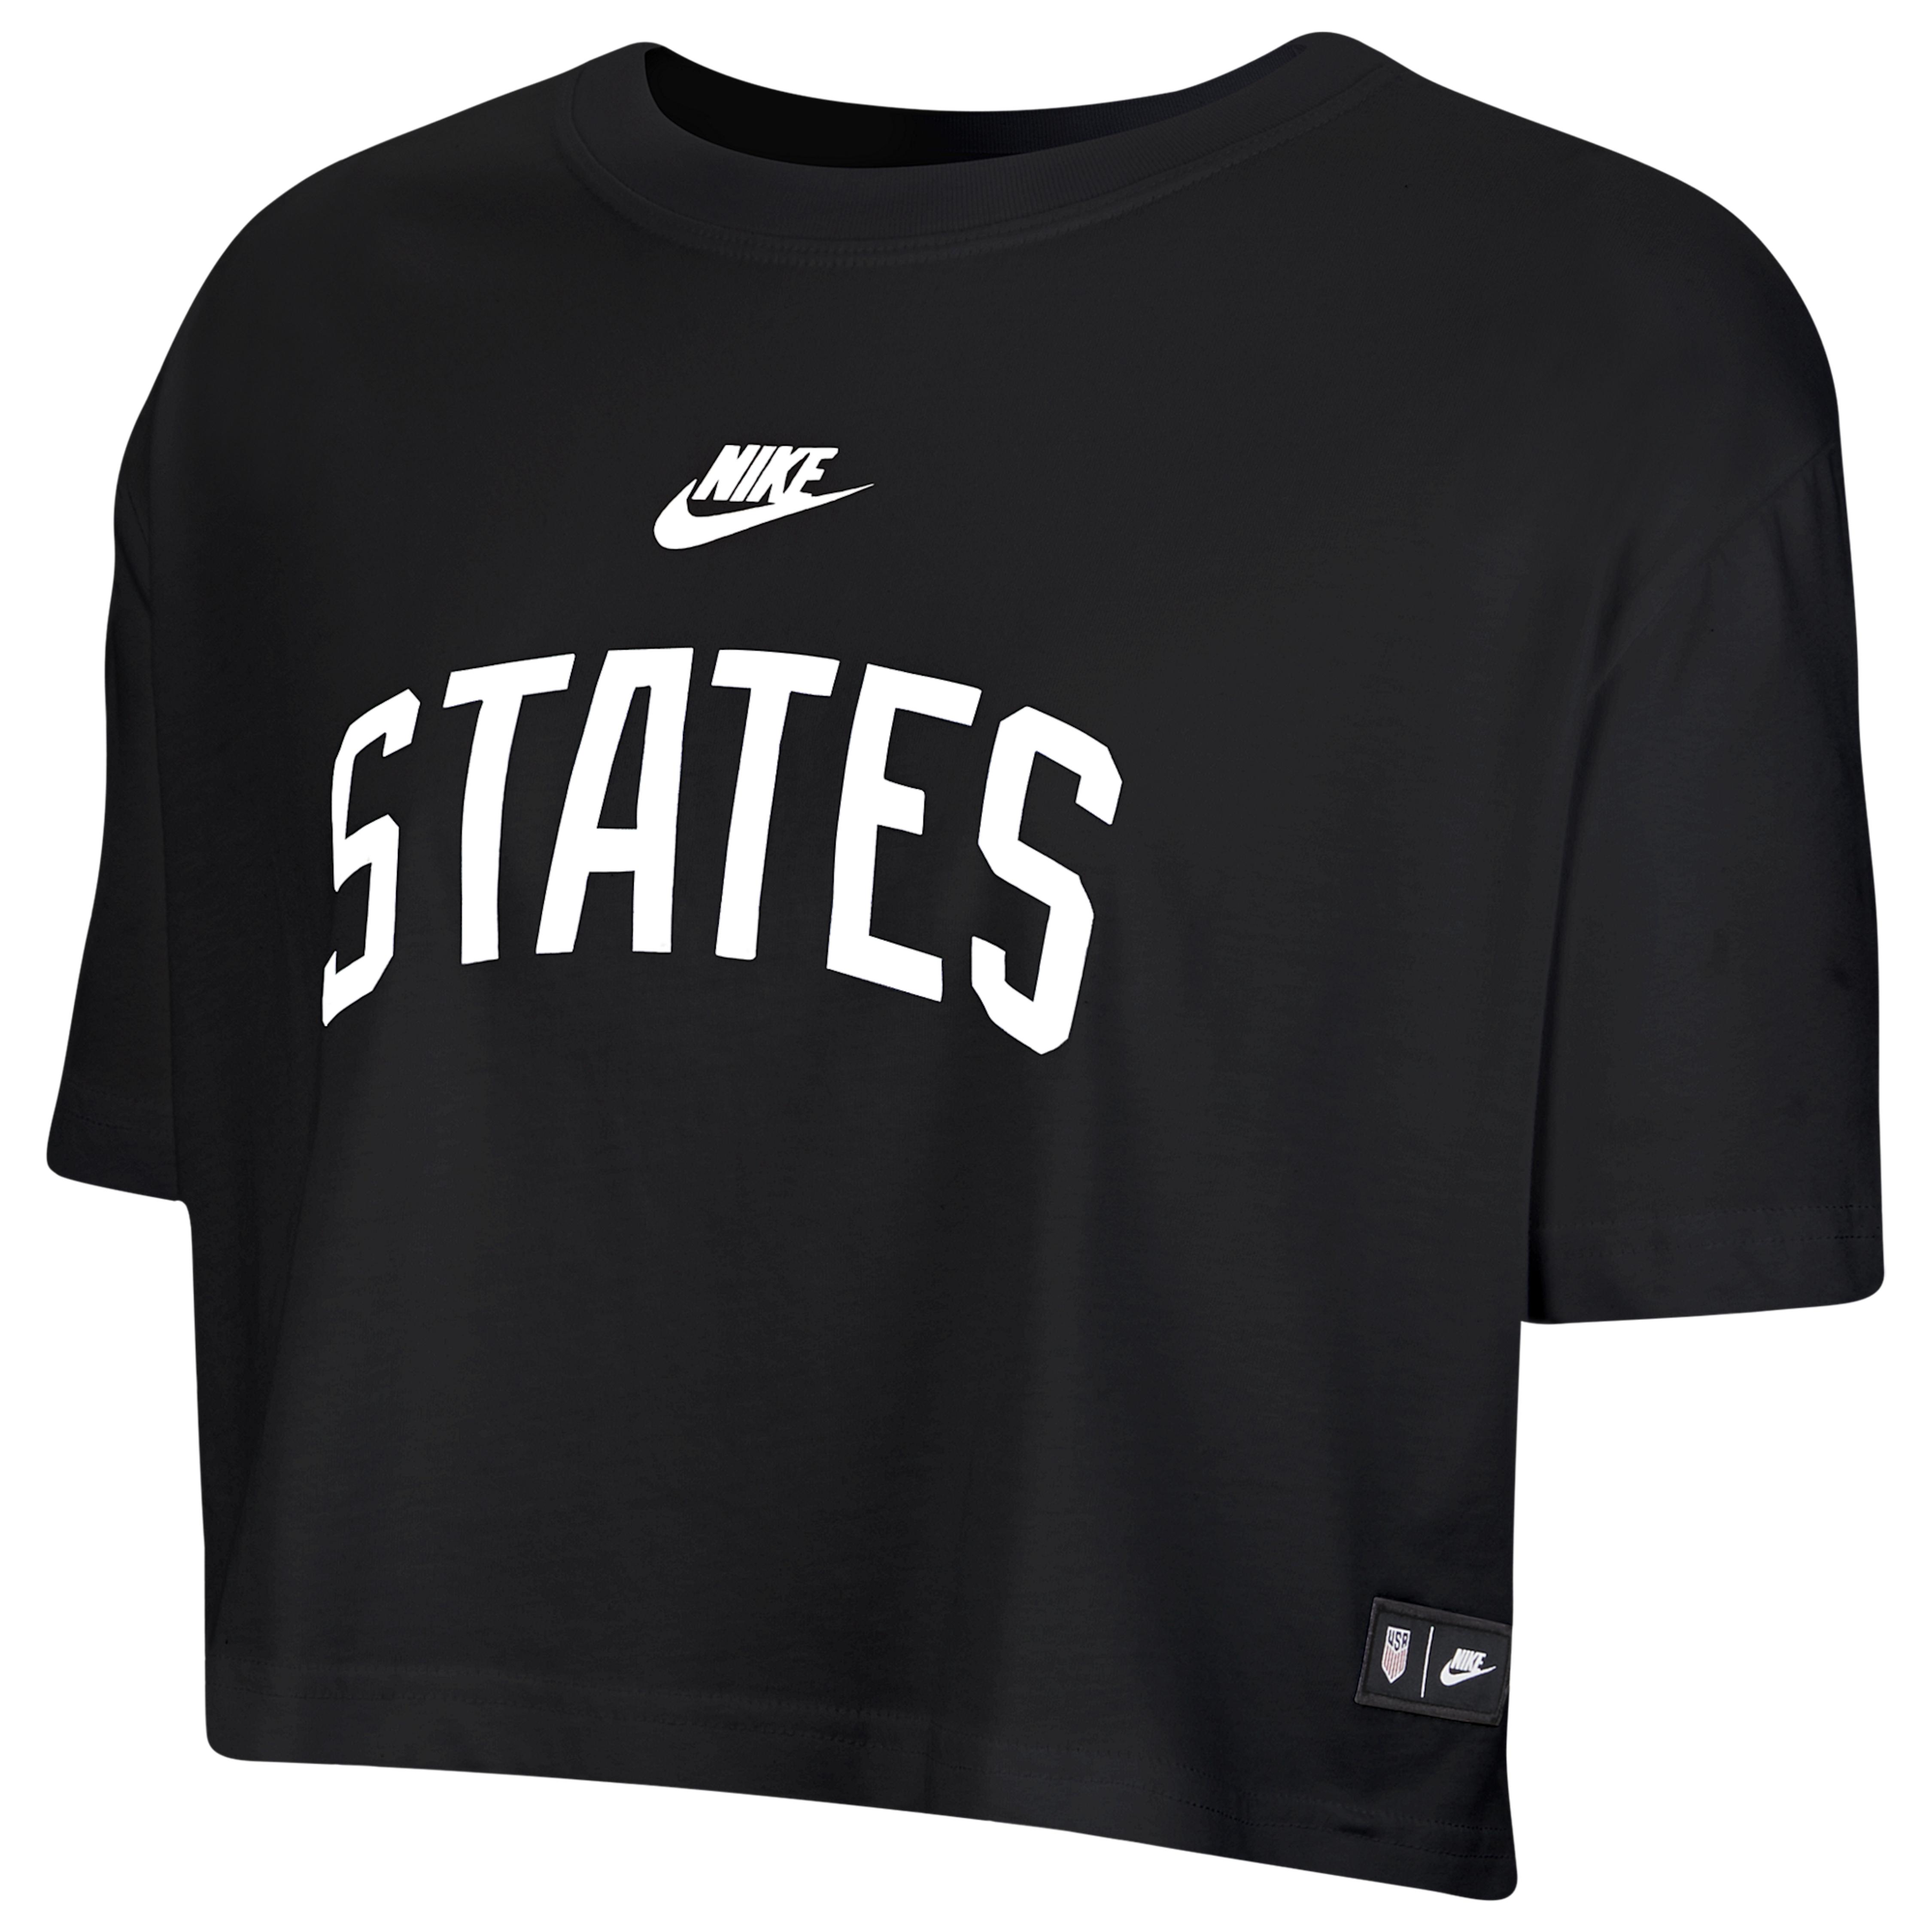 Nike Cotton Womens States Crop T-shirt in Black - Lyst